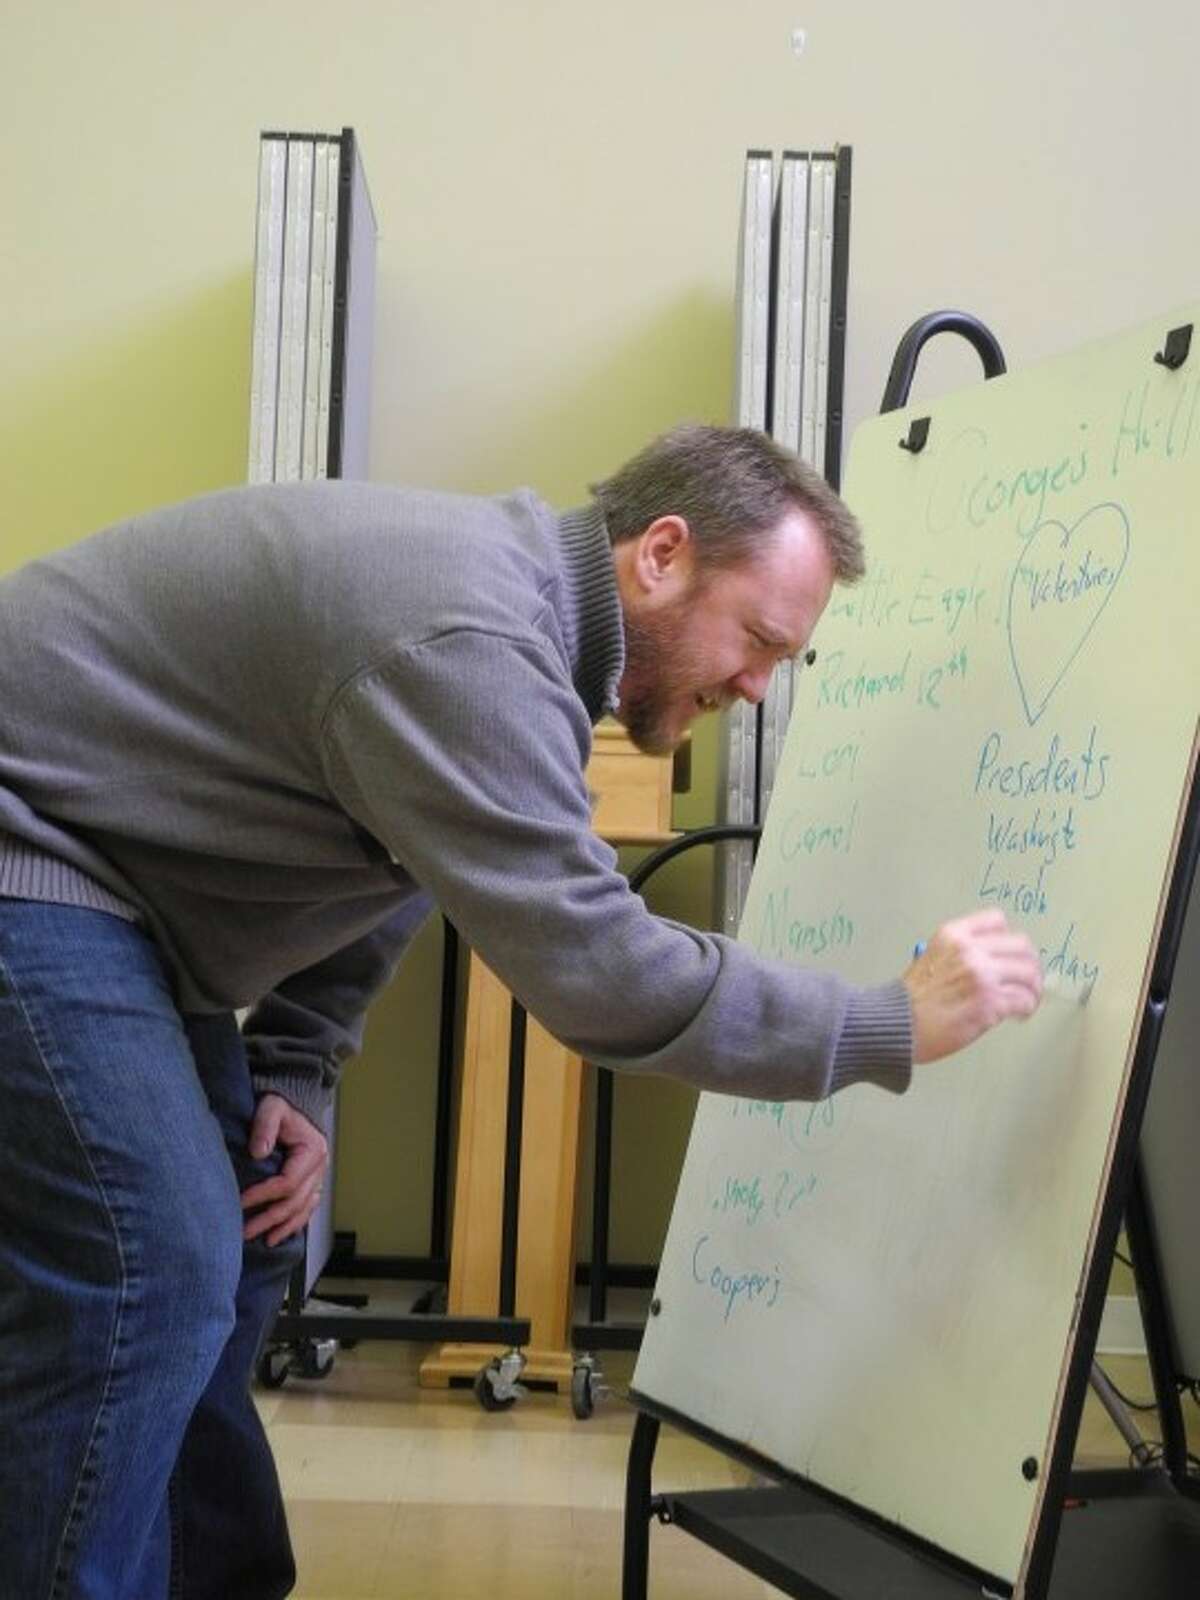 The Rev. Todd Shipley writes down memorable February events on a whiteboard inside Unity Hill United Church of Christ, located at 364 White Plains Road. The church hosts George’s Hill, a social engagement group for persons with memory problems or early dementia and their caregivers, the second Thursday of the month from 11:30 a.m. to 1 p.m. — Steve Coulter photo